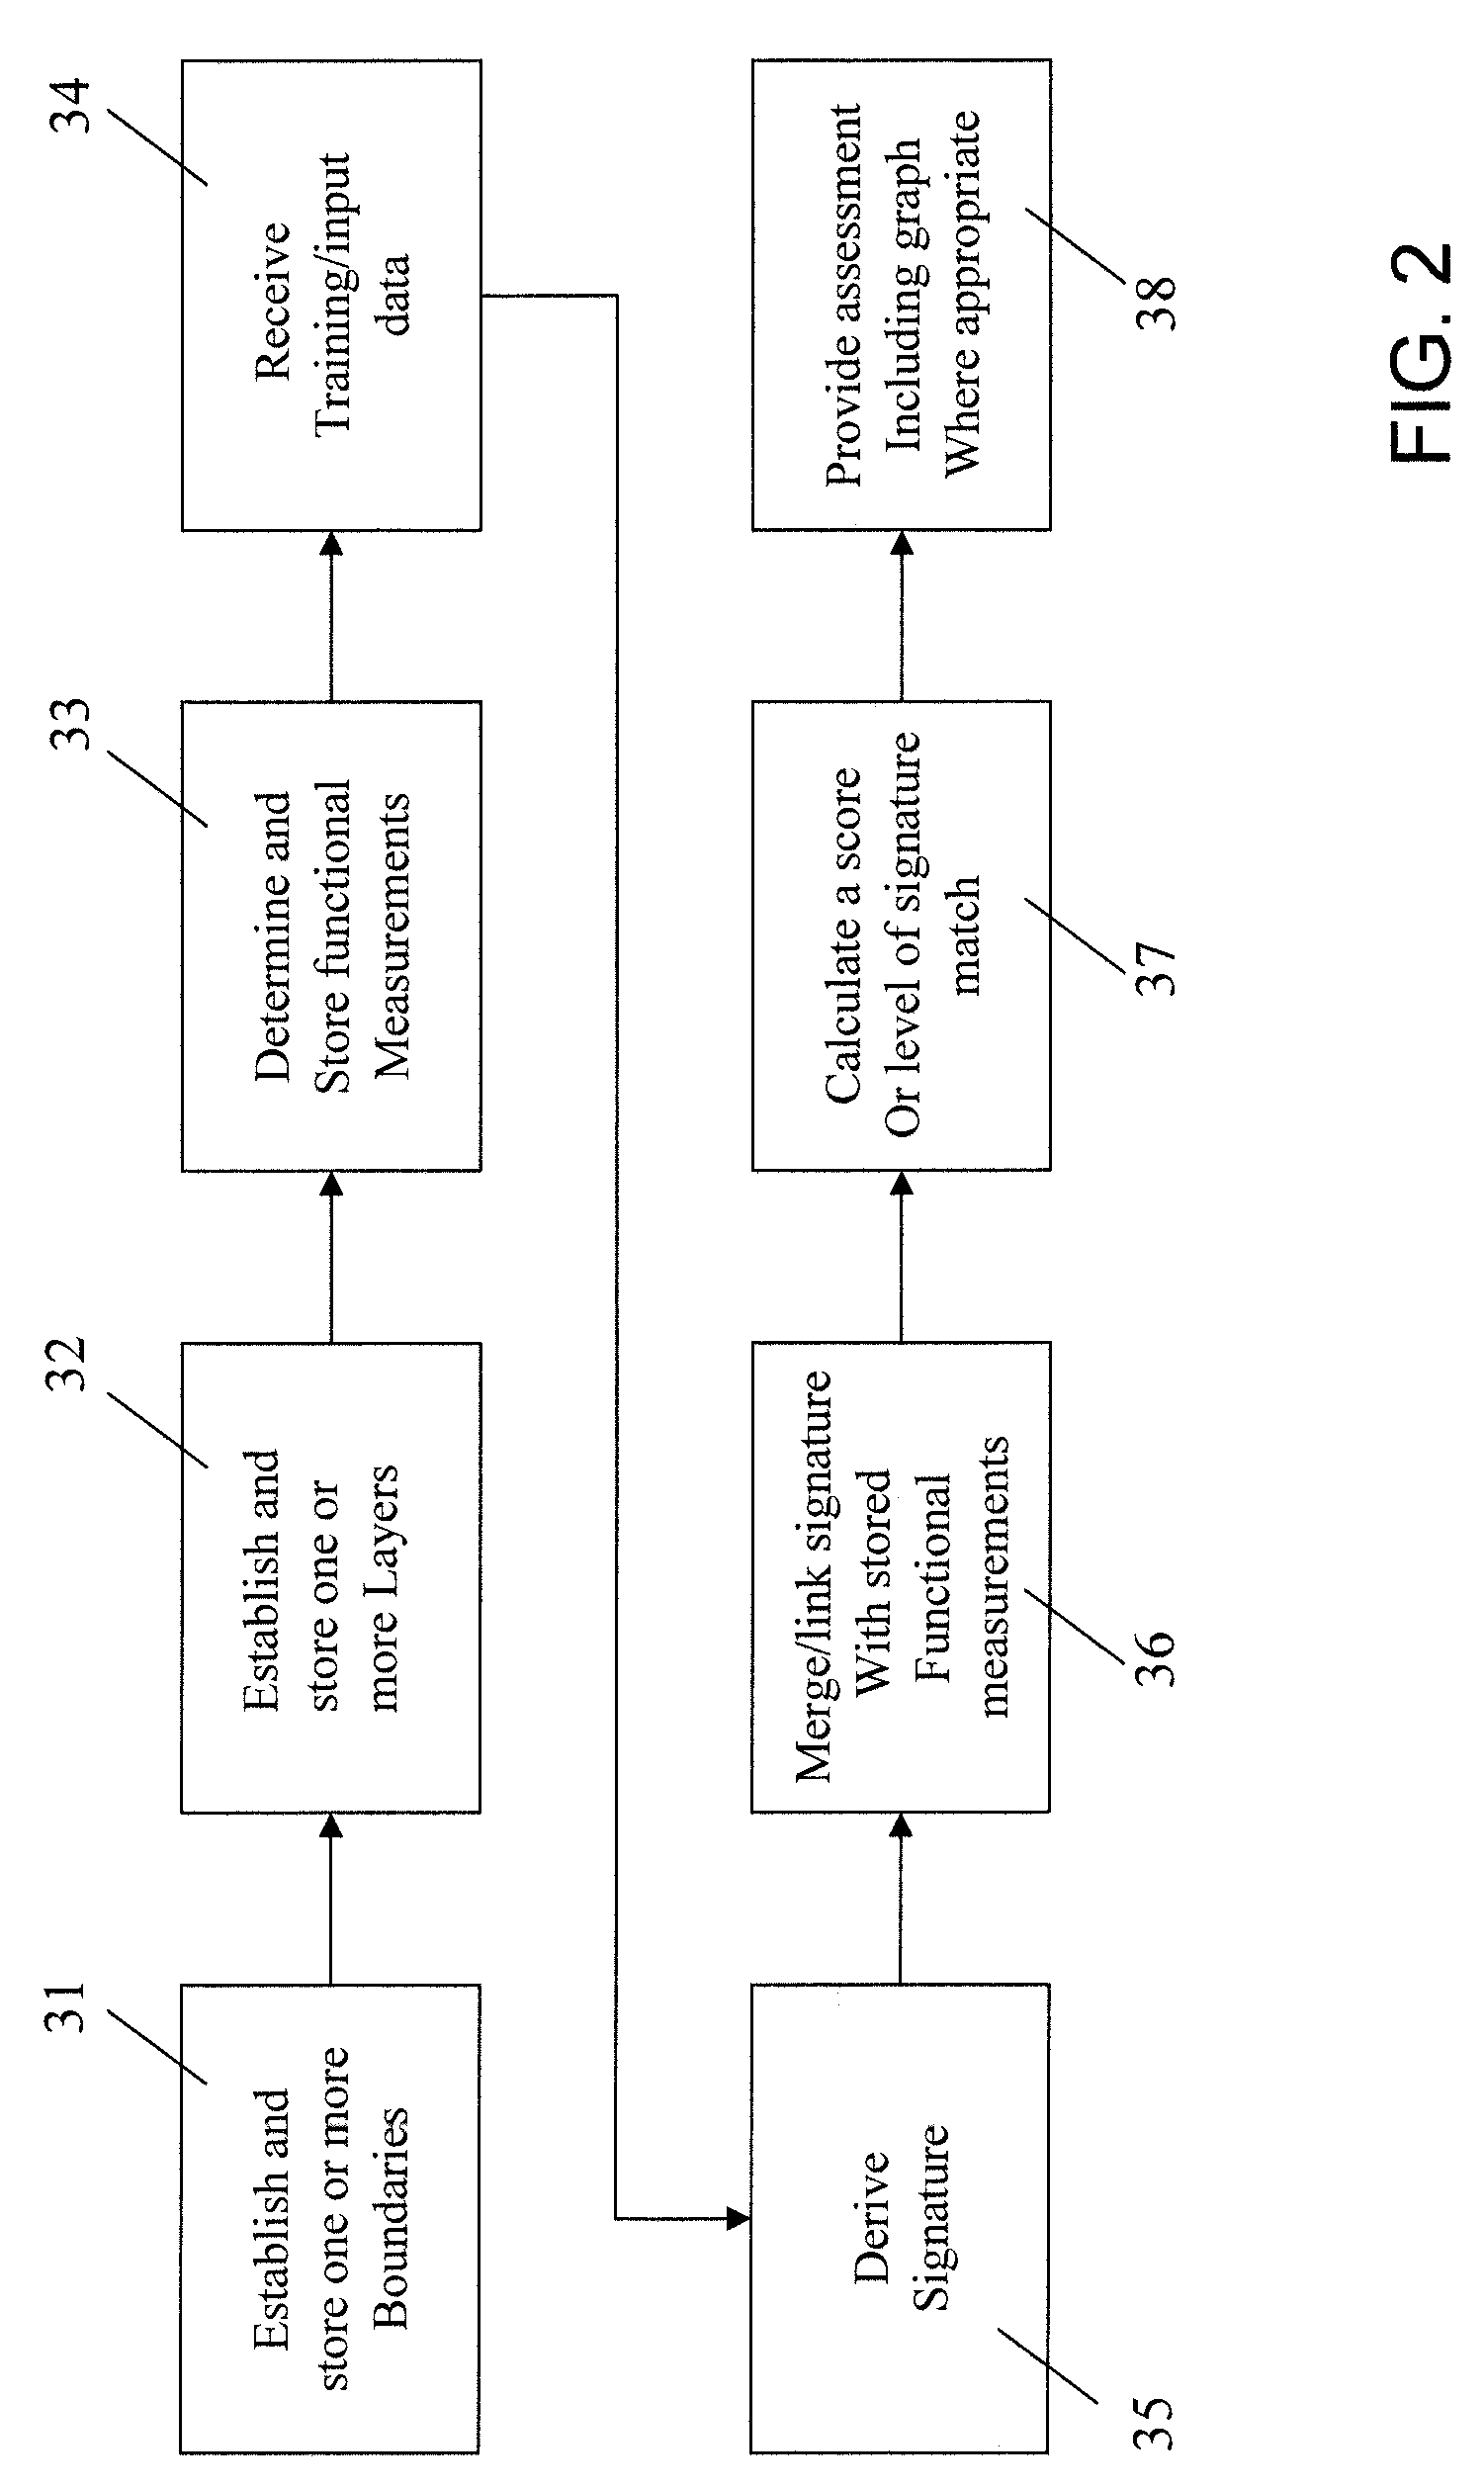 Temporal-influenced geospatial modeling system and method